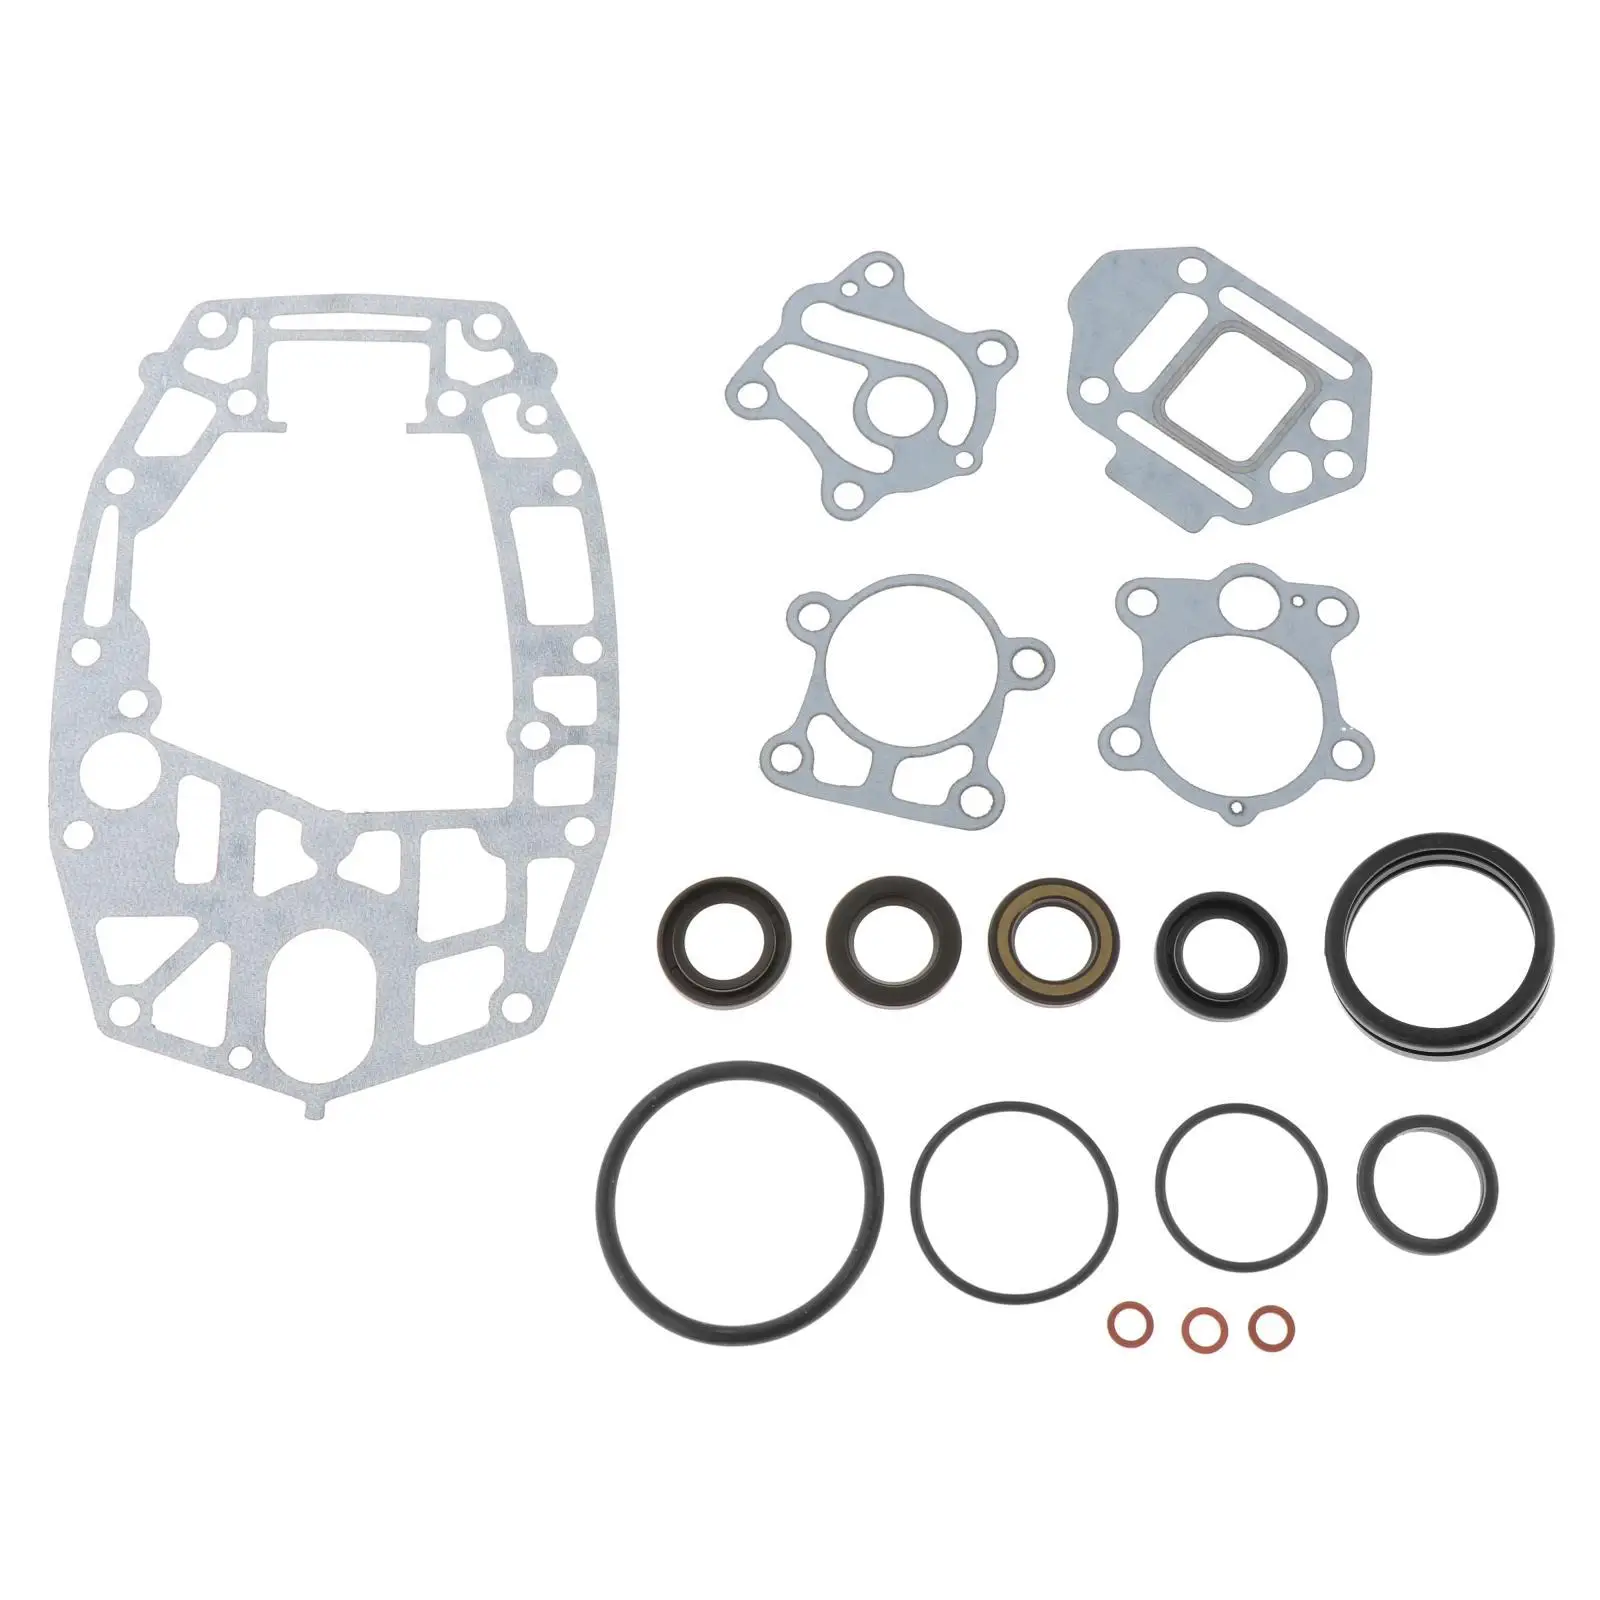 6H4-W0001-20-00 Lower Unit Seal Fit for Series 30HP 40HP O